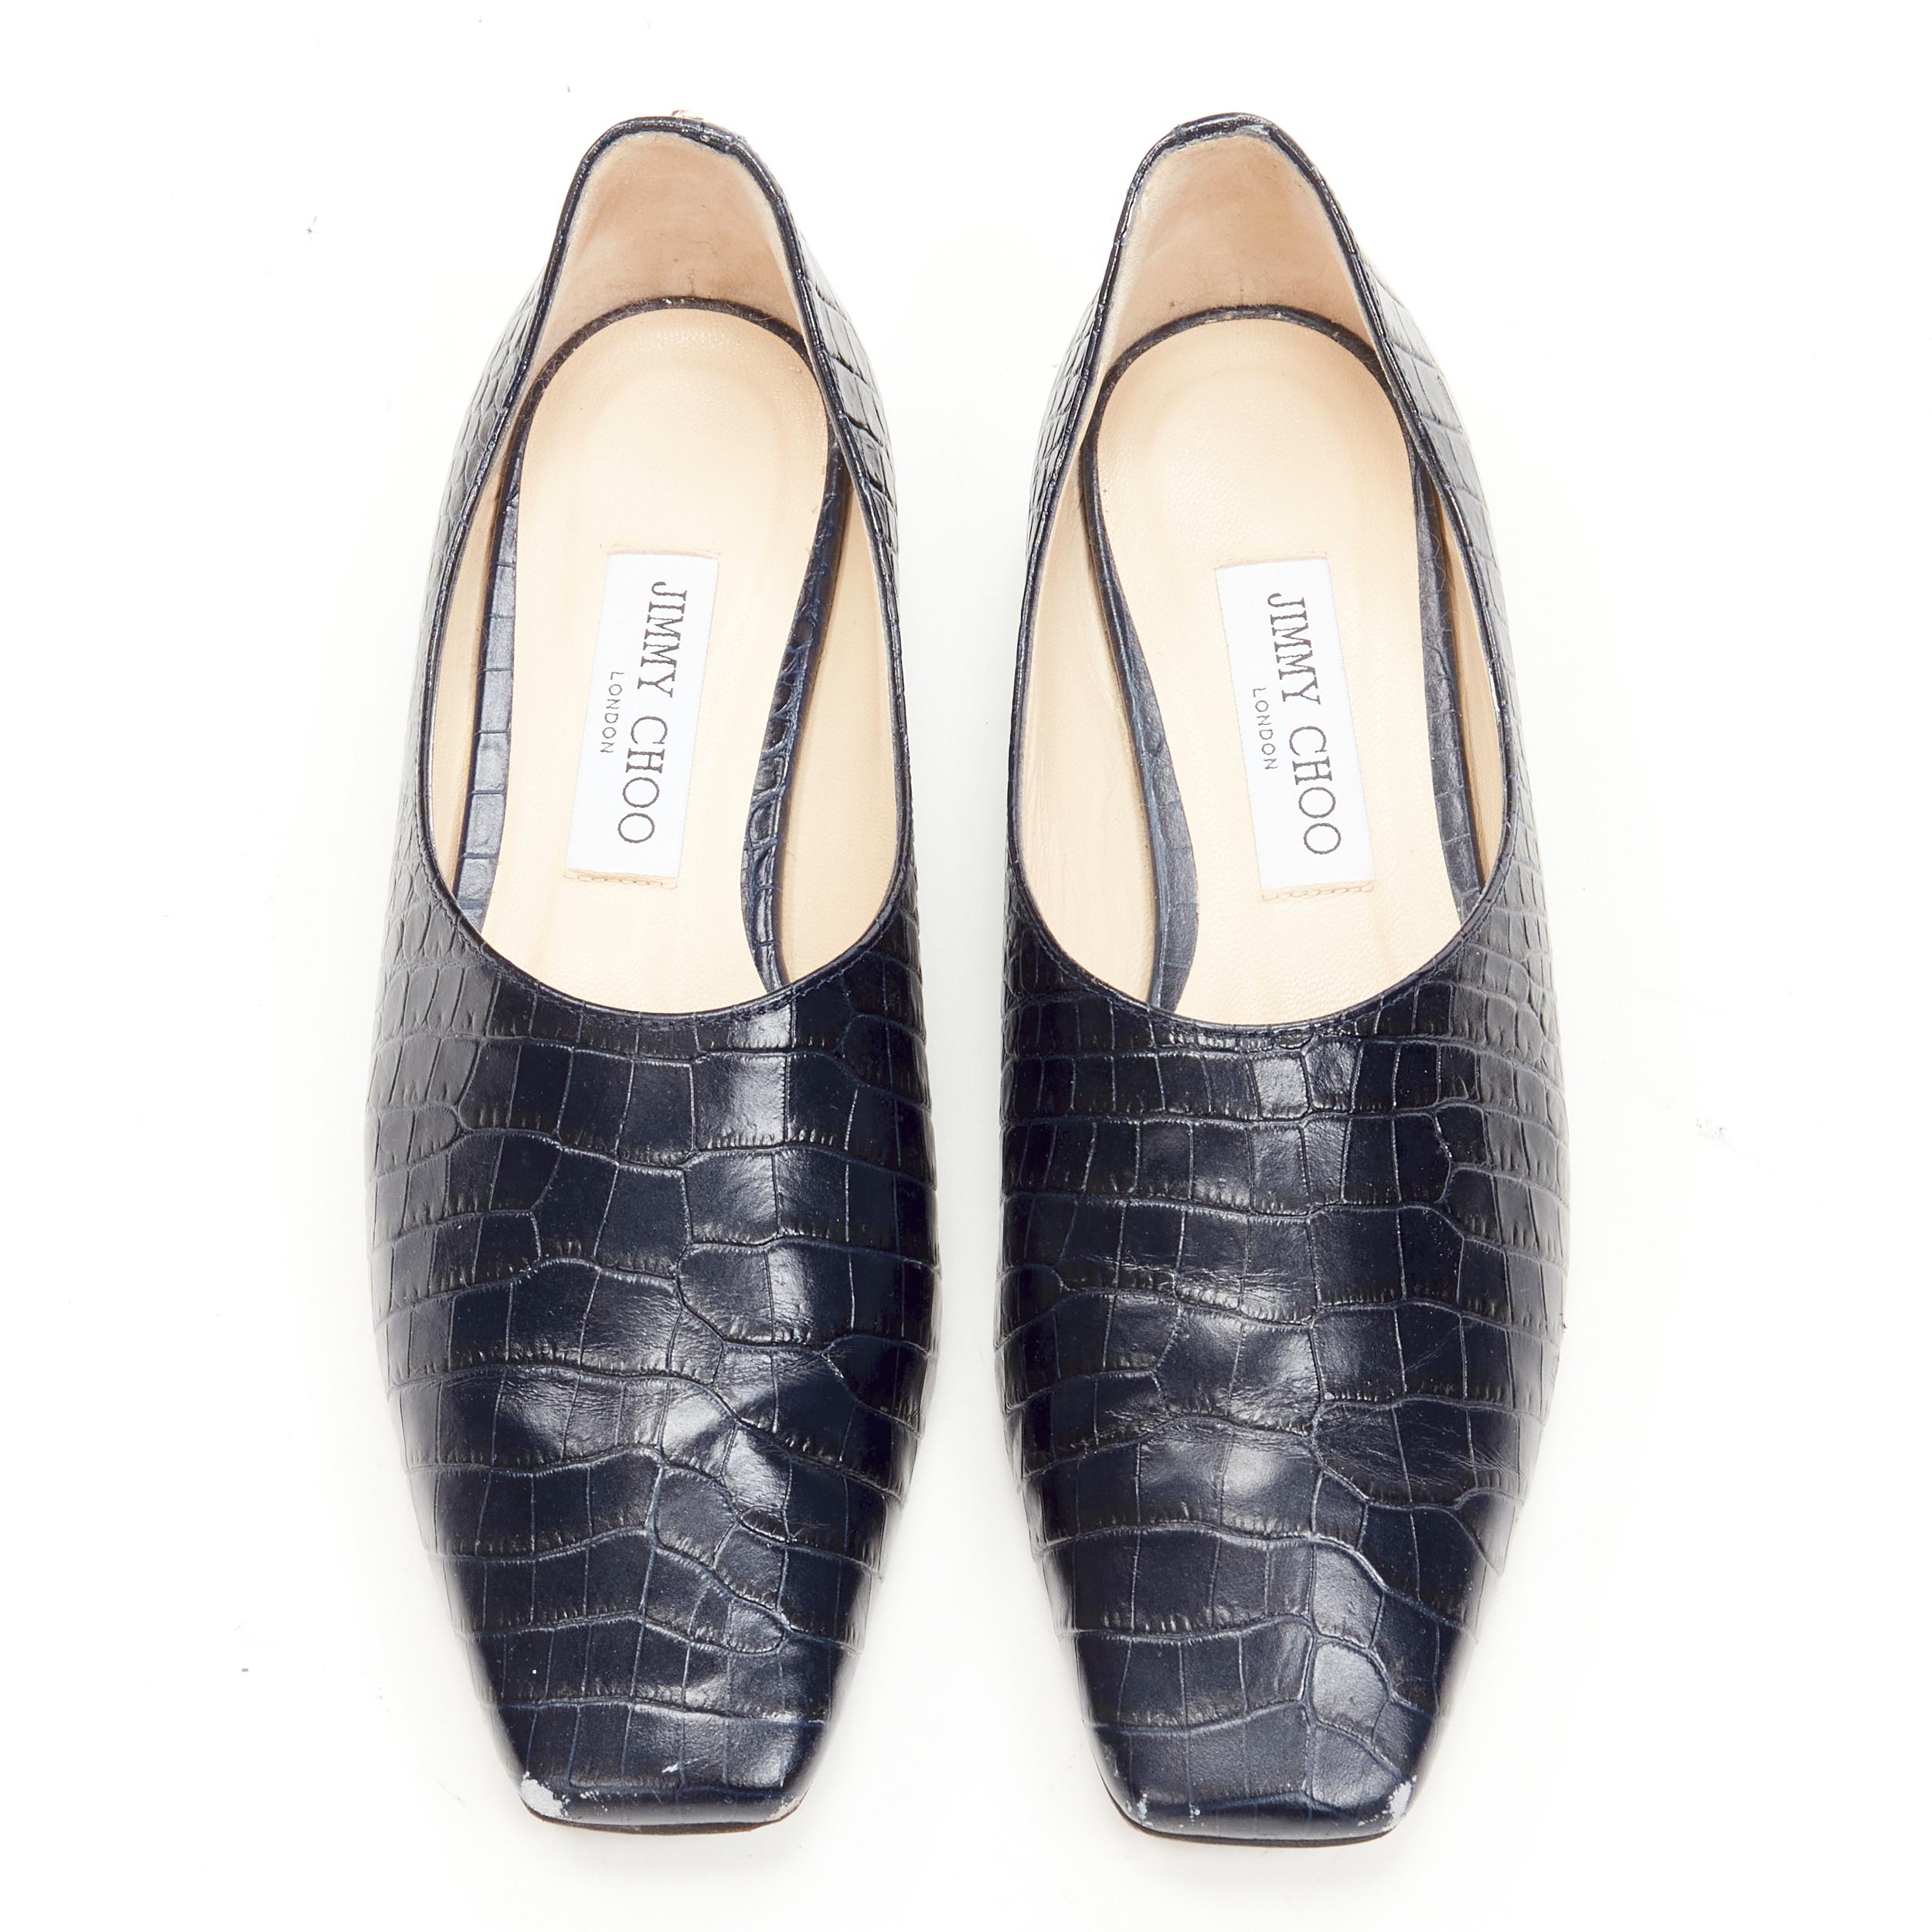 JIMMY CHOO black navy mock croc leather square toe JC charm flats EU38 
Reference: JACG/A00062 
Brand: Jimmy Choo 
Material: Leather 
Color: Navy 
Pattern: Solid 
Made in: Italy 


CONDITION: 
Condition: Good, this item was pre-owned and is in good